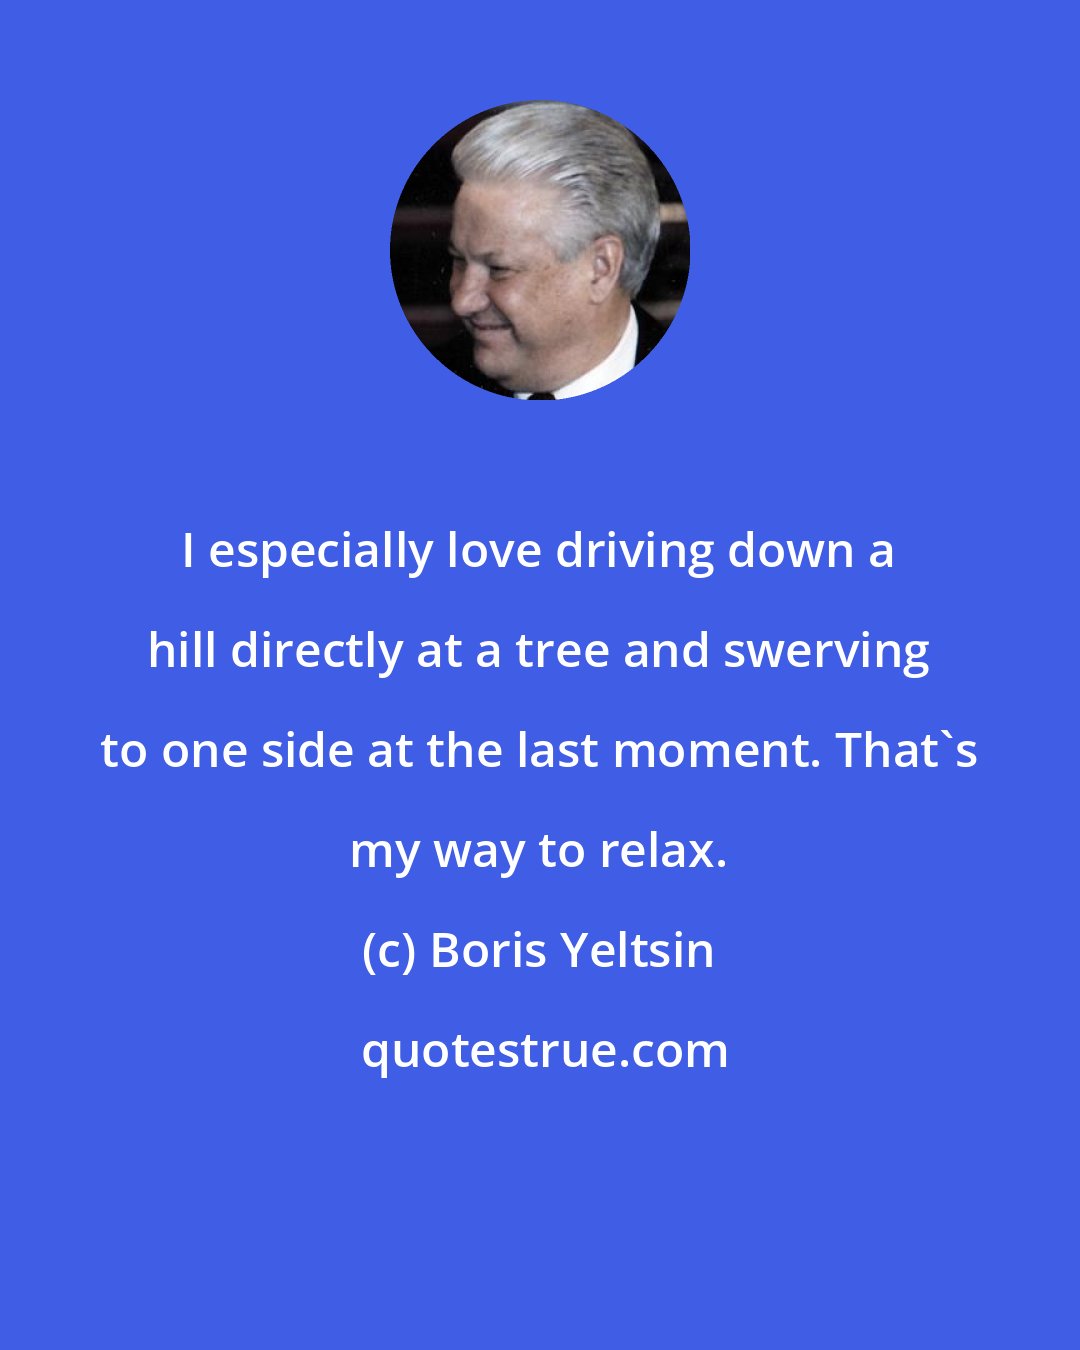 Boris Yeltsin: I especially love driving down a hill directly at a tree and swerving to one side at the last moment. That's my way to relax.